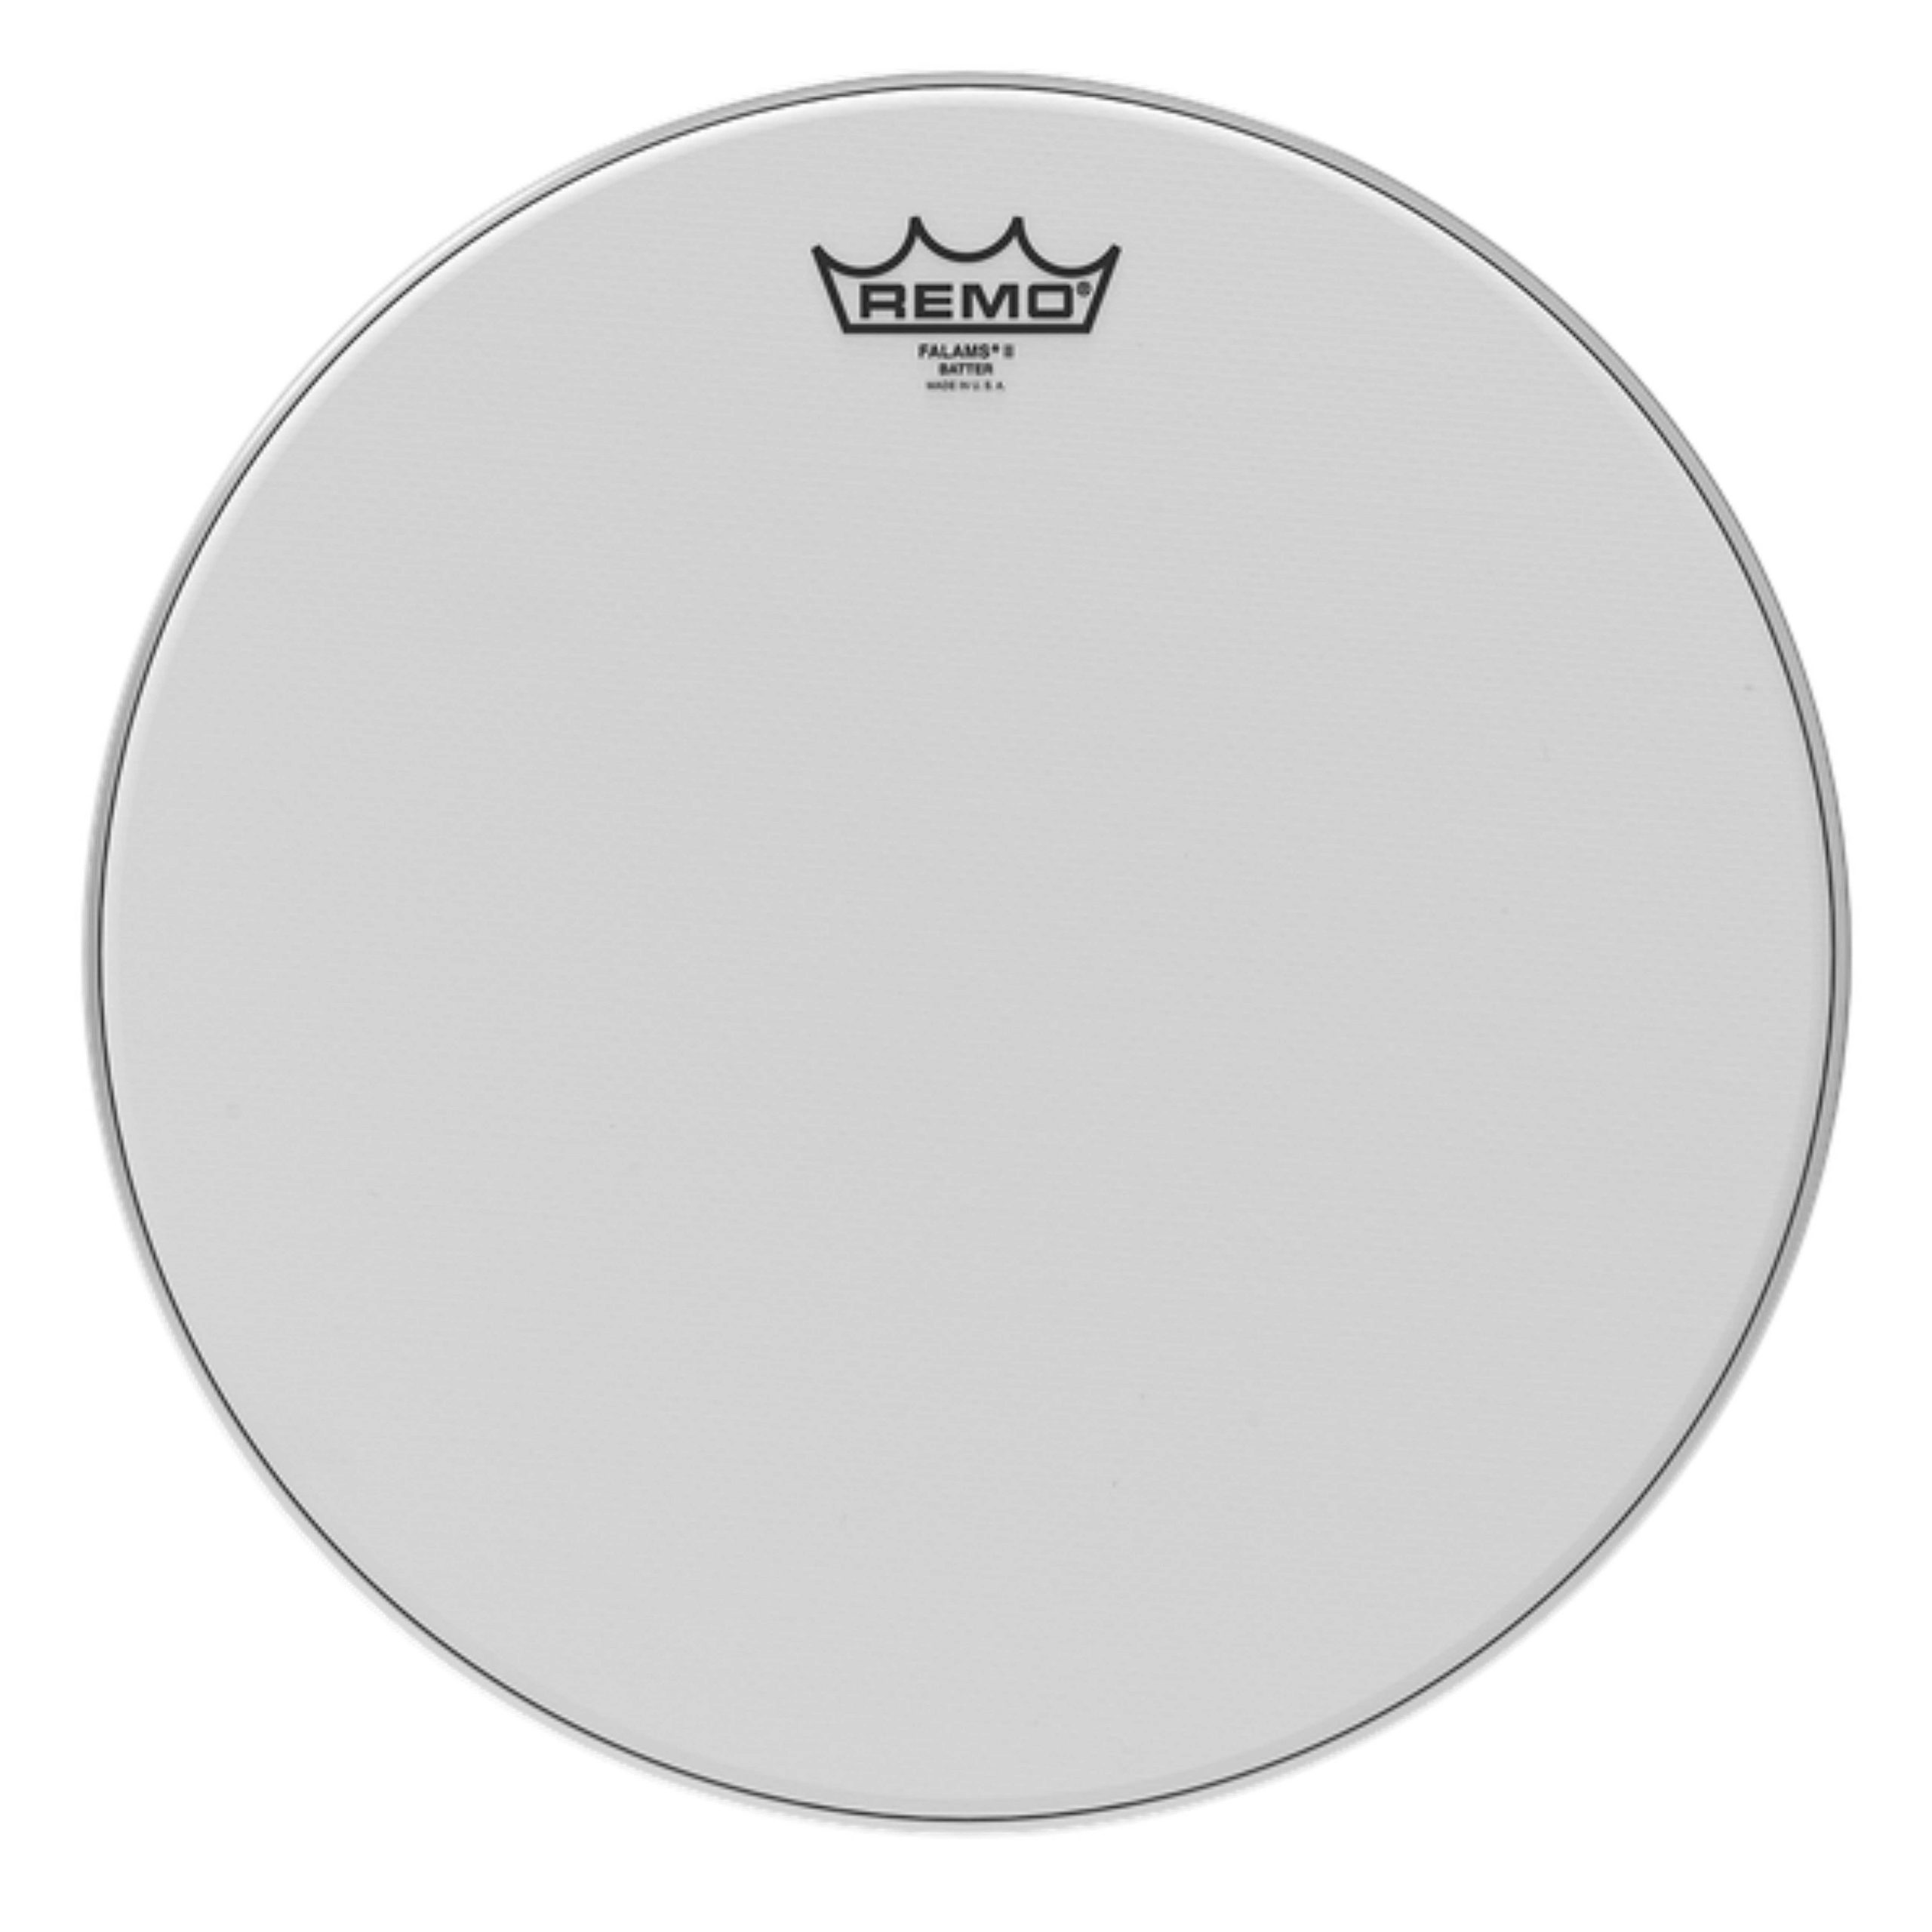 Remo Falams Smooth White - 13" Marching Snare Drum Head